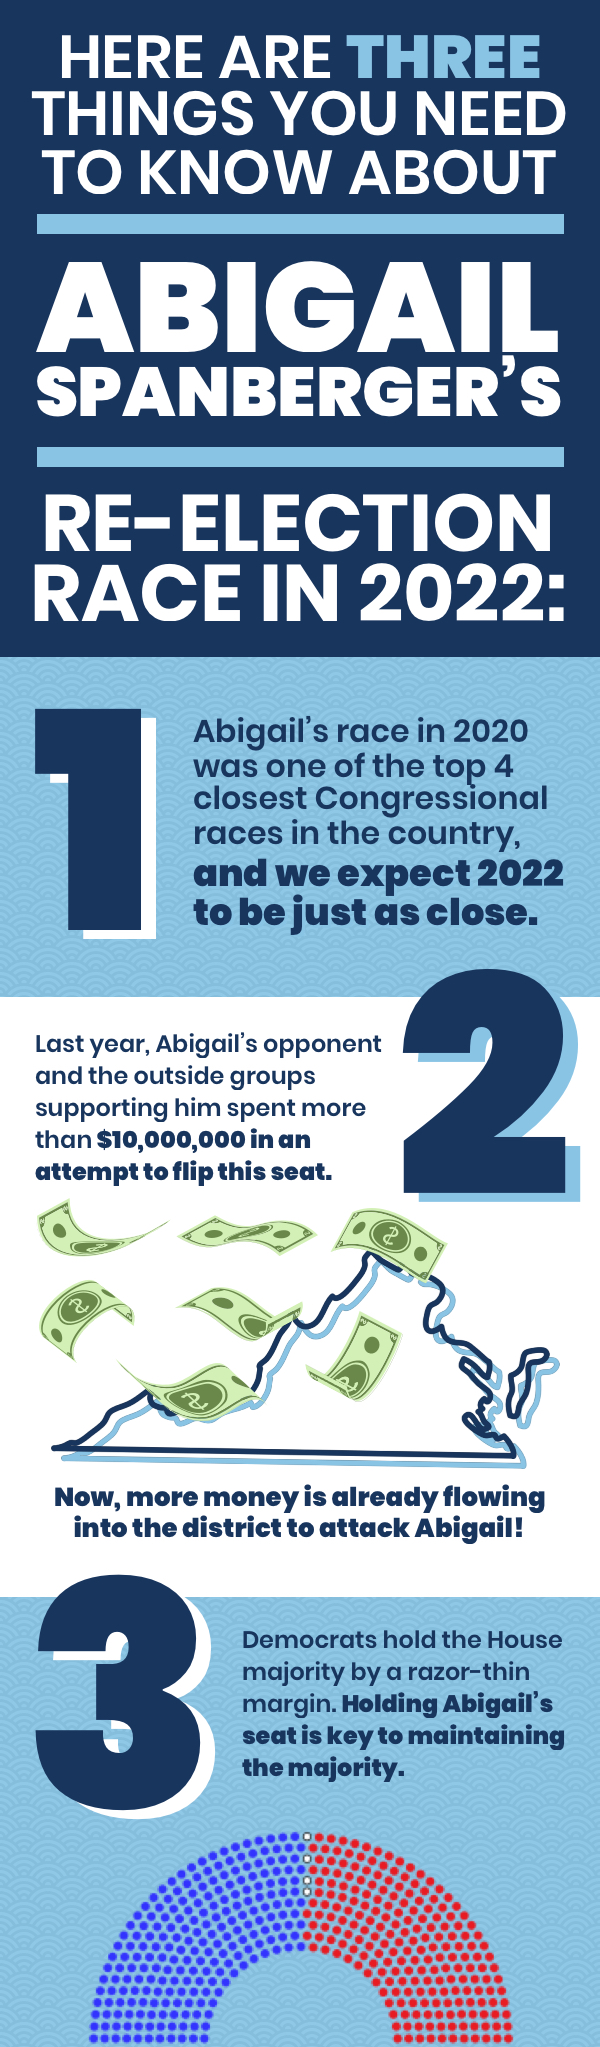 We need your help to re-elect Abigail Spanberger in 2022! She is in a close race, will have big GOP spending against her, and we need to keep her seat to keep Dems in the majority!